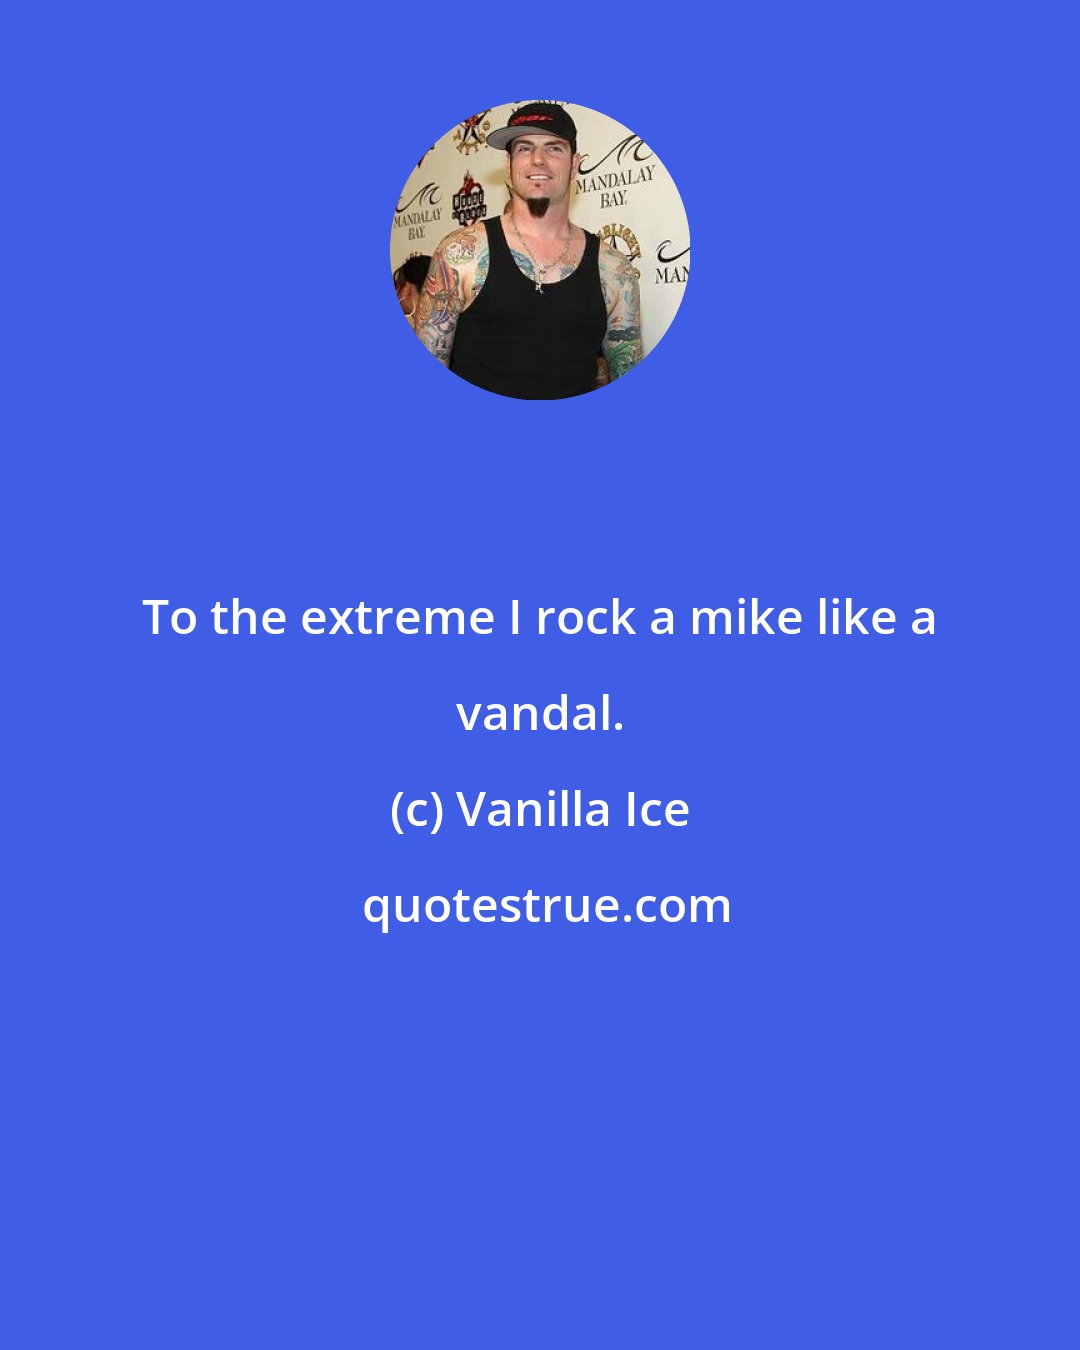 Vanilla Ice: To the extreme I rock a mike like a vandal.